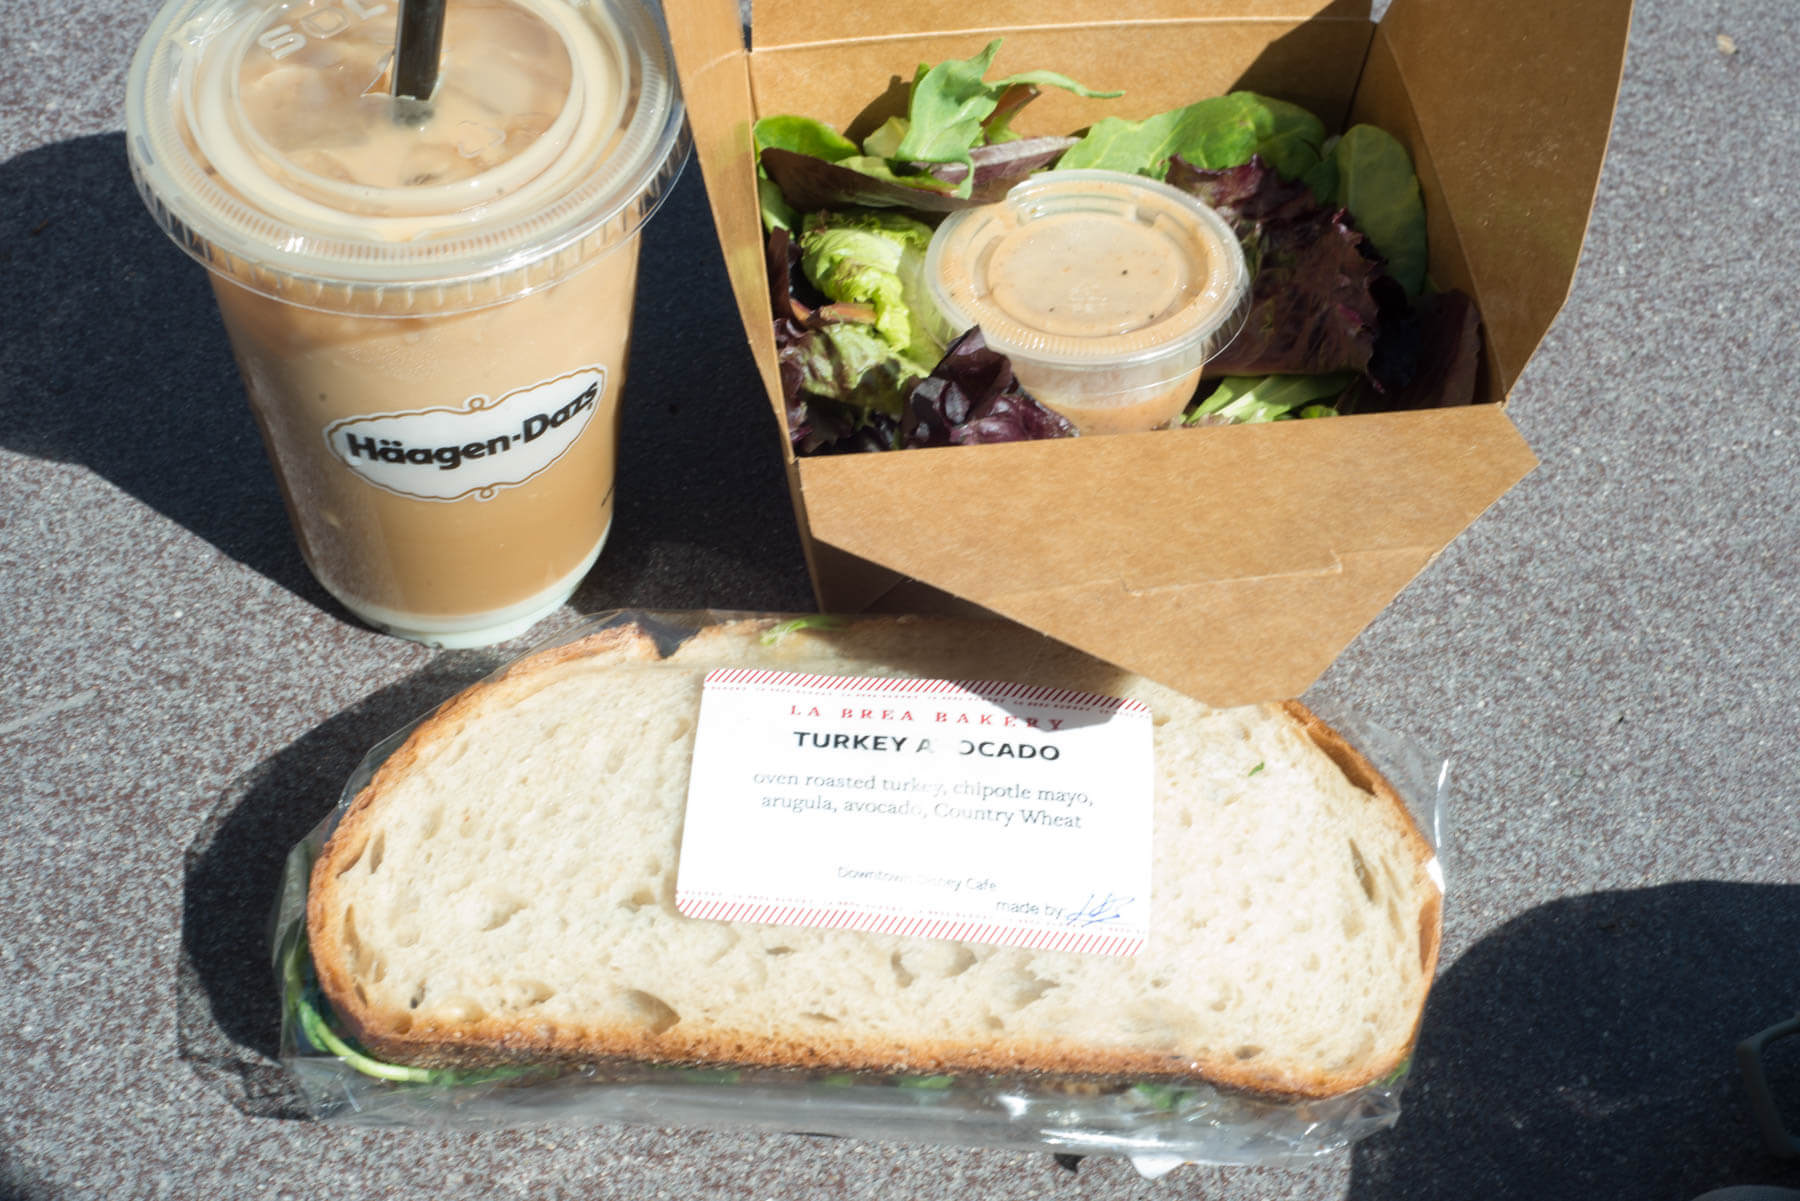 Sandwich, Salad, and Iced Coffee from La Brea Bakery in Downtown Disney at Disneyland